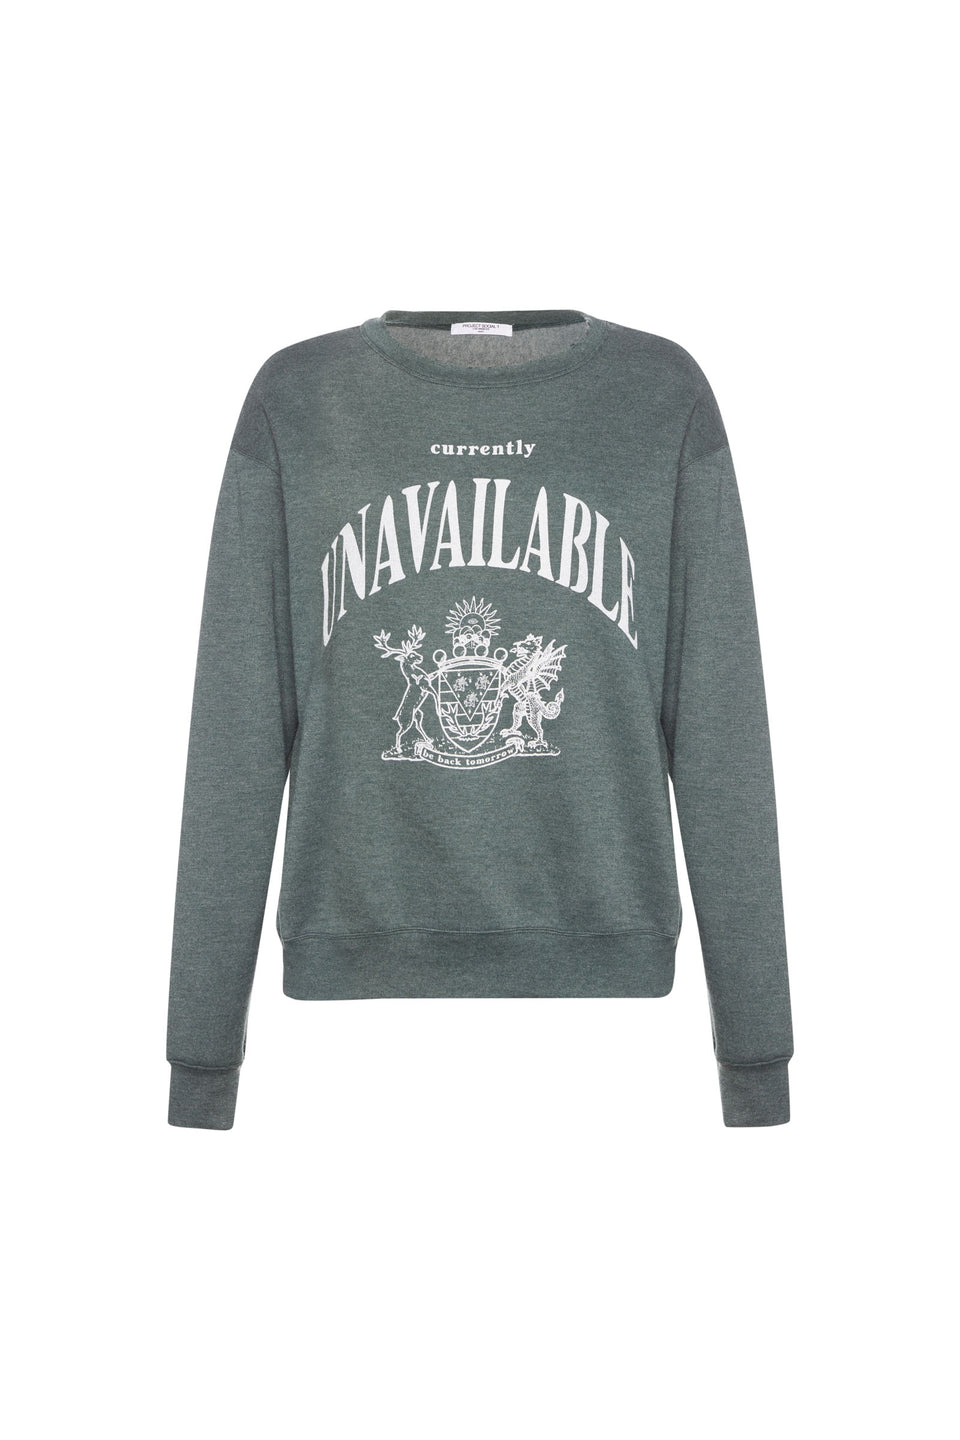 PROJECT_SOCIAL_T_UNAVAILABLE_SWEATSHIRT_FOREST